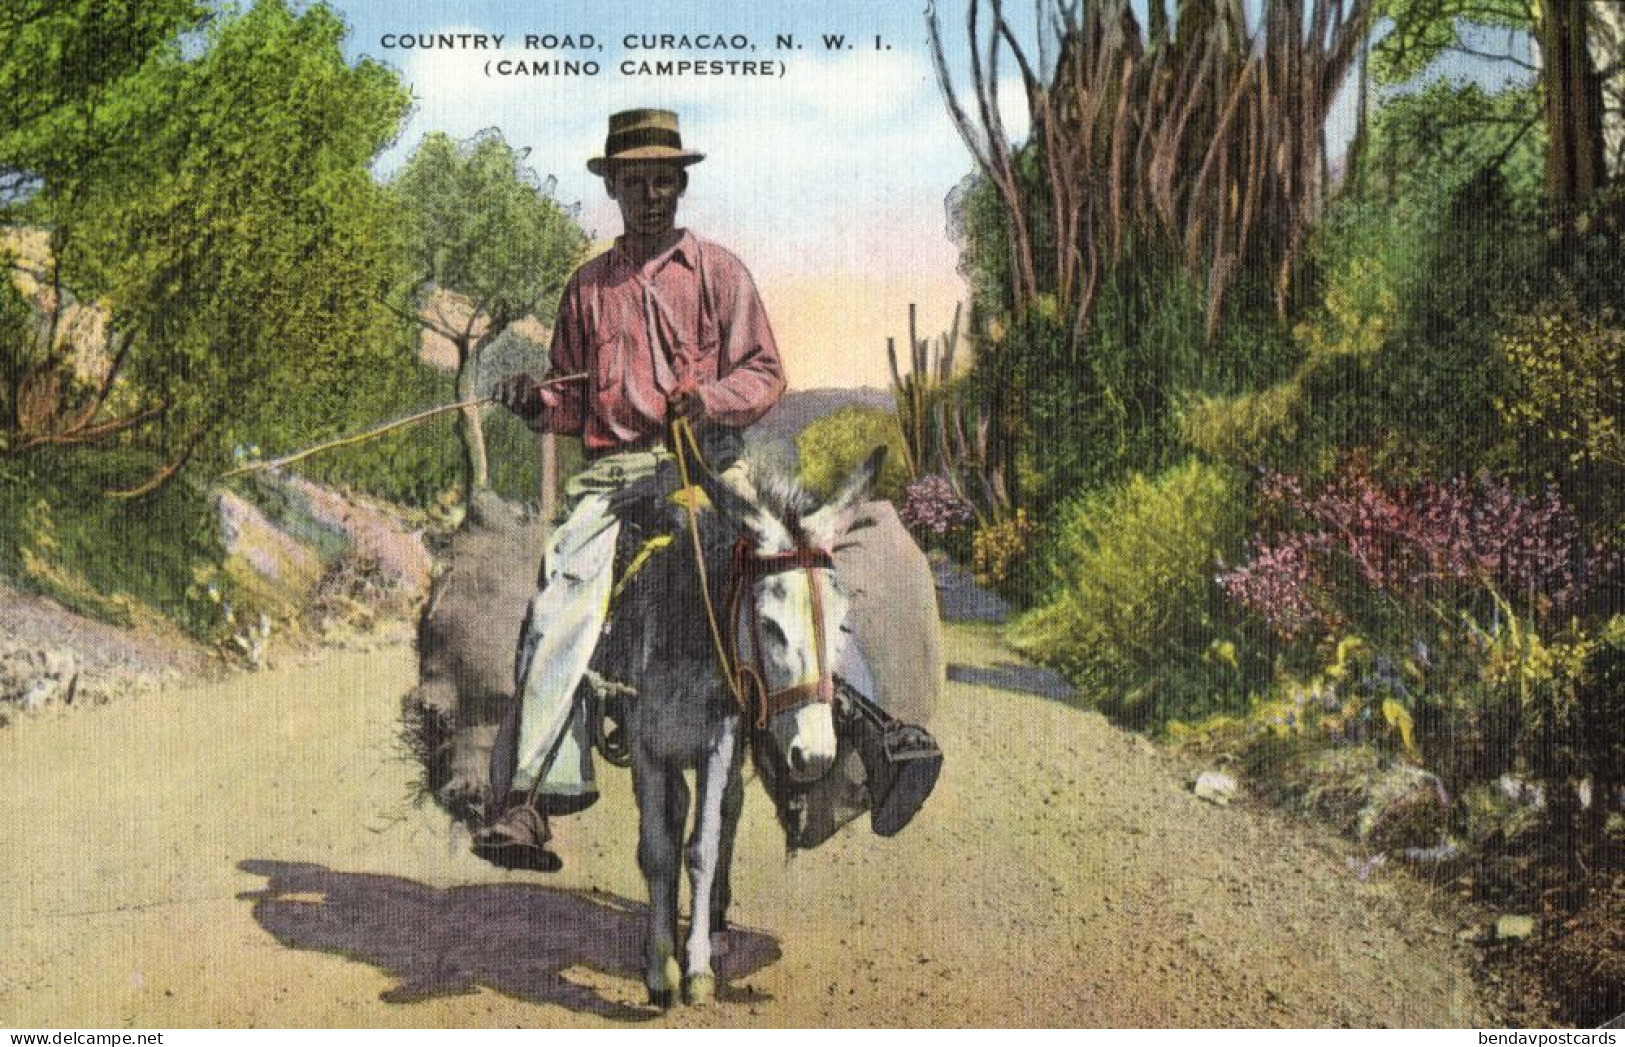 Curacao, N.W.I., WILLEMSTAD, Country Road, Donkey (1930s) Kropp 18541 Postcard - Curaçao